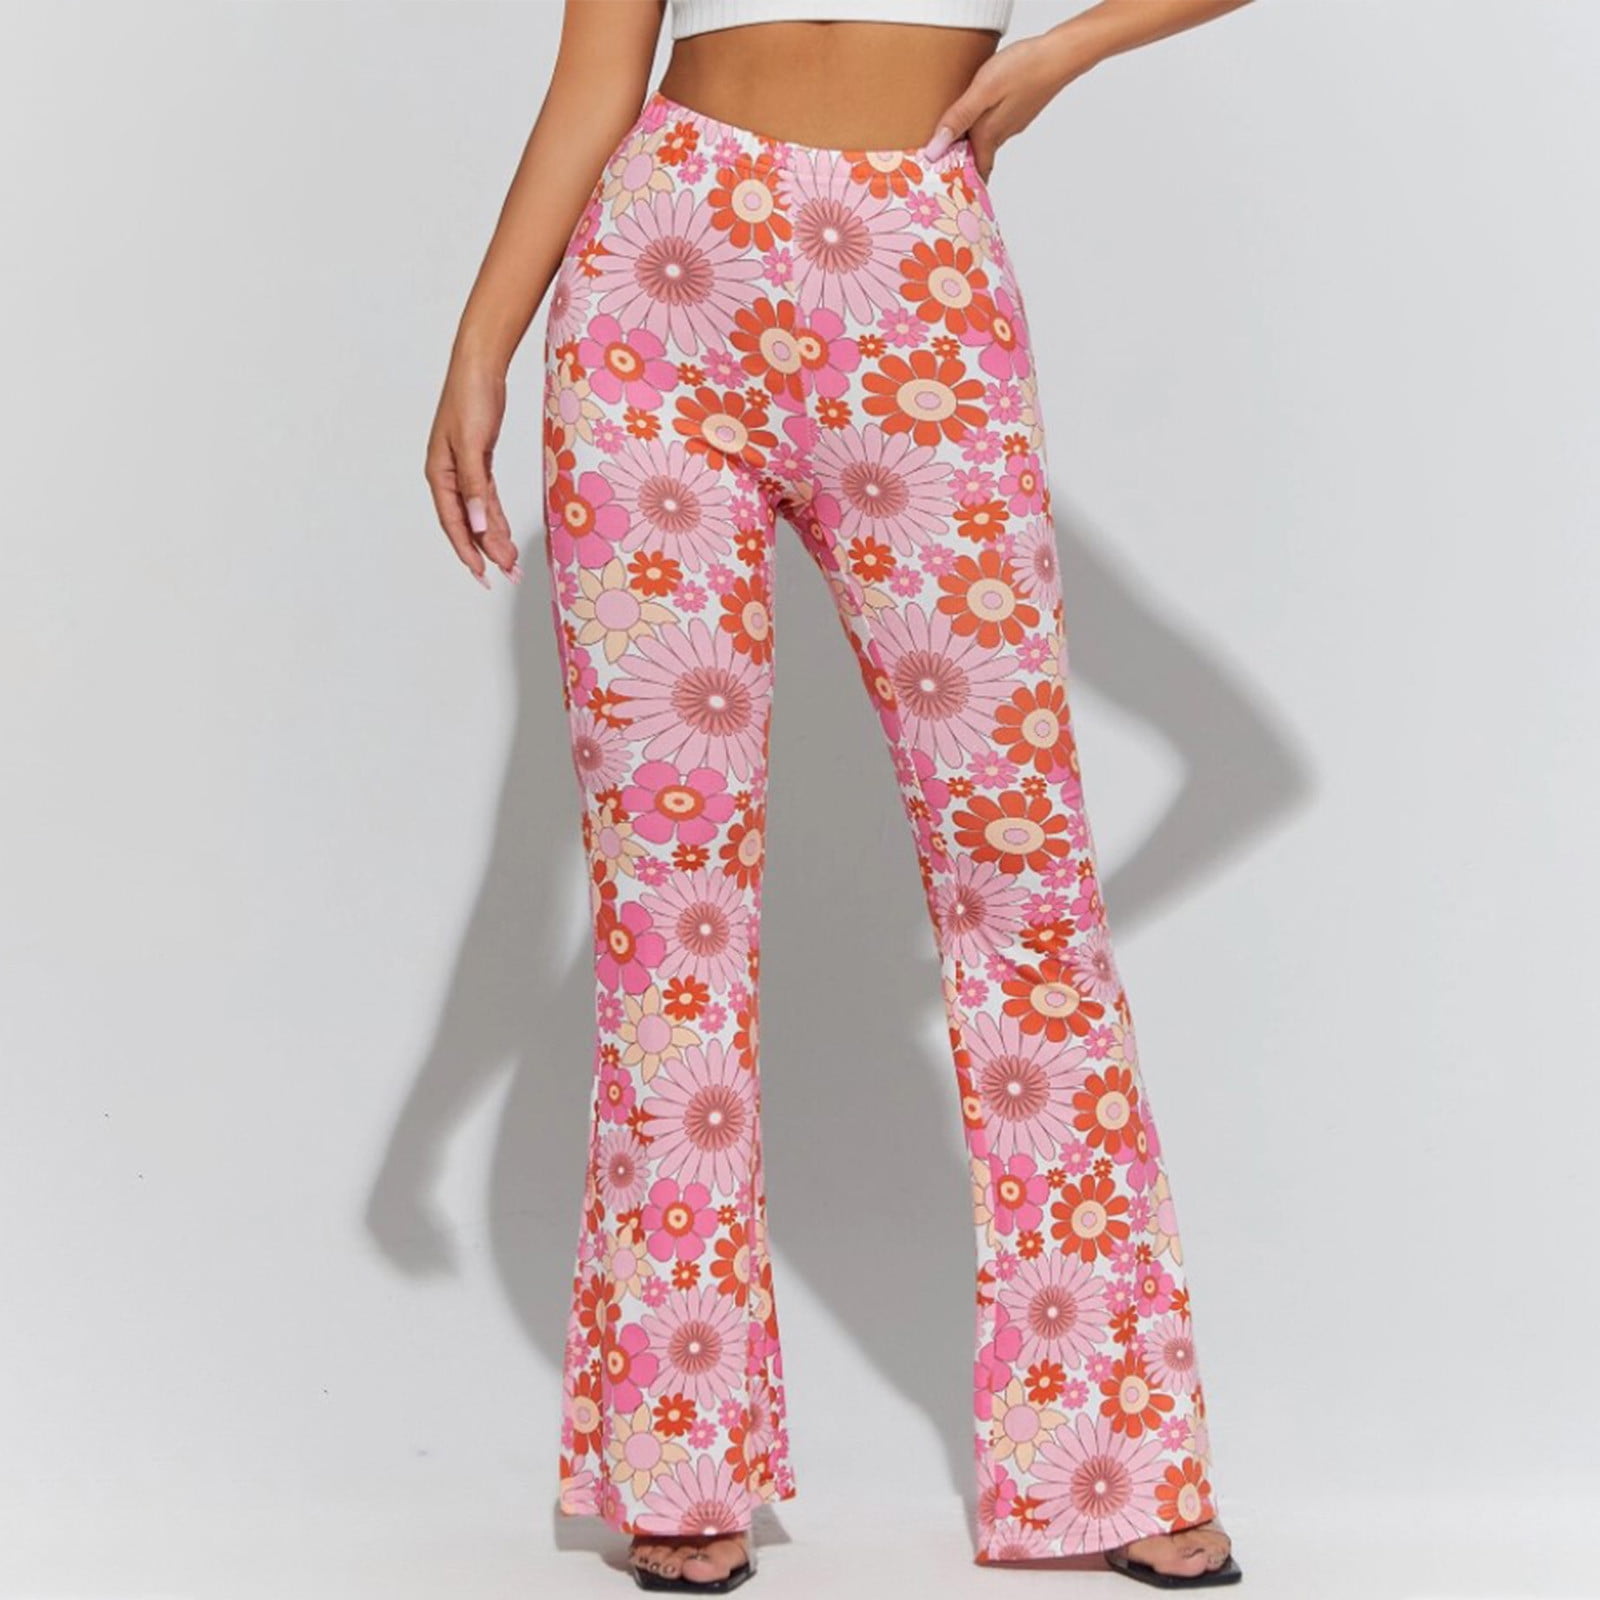 Photo-Ready Outfits,AXXD Plus Size Long Pants High Waist Summer Printed  Pants Women Pants Clearance 1x Pink 14 